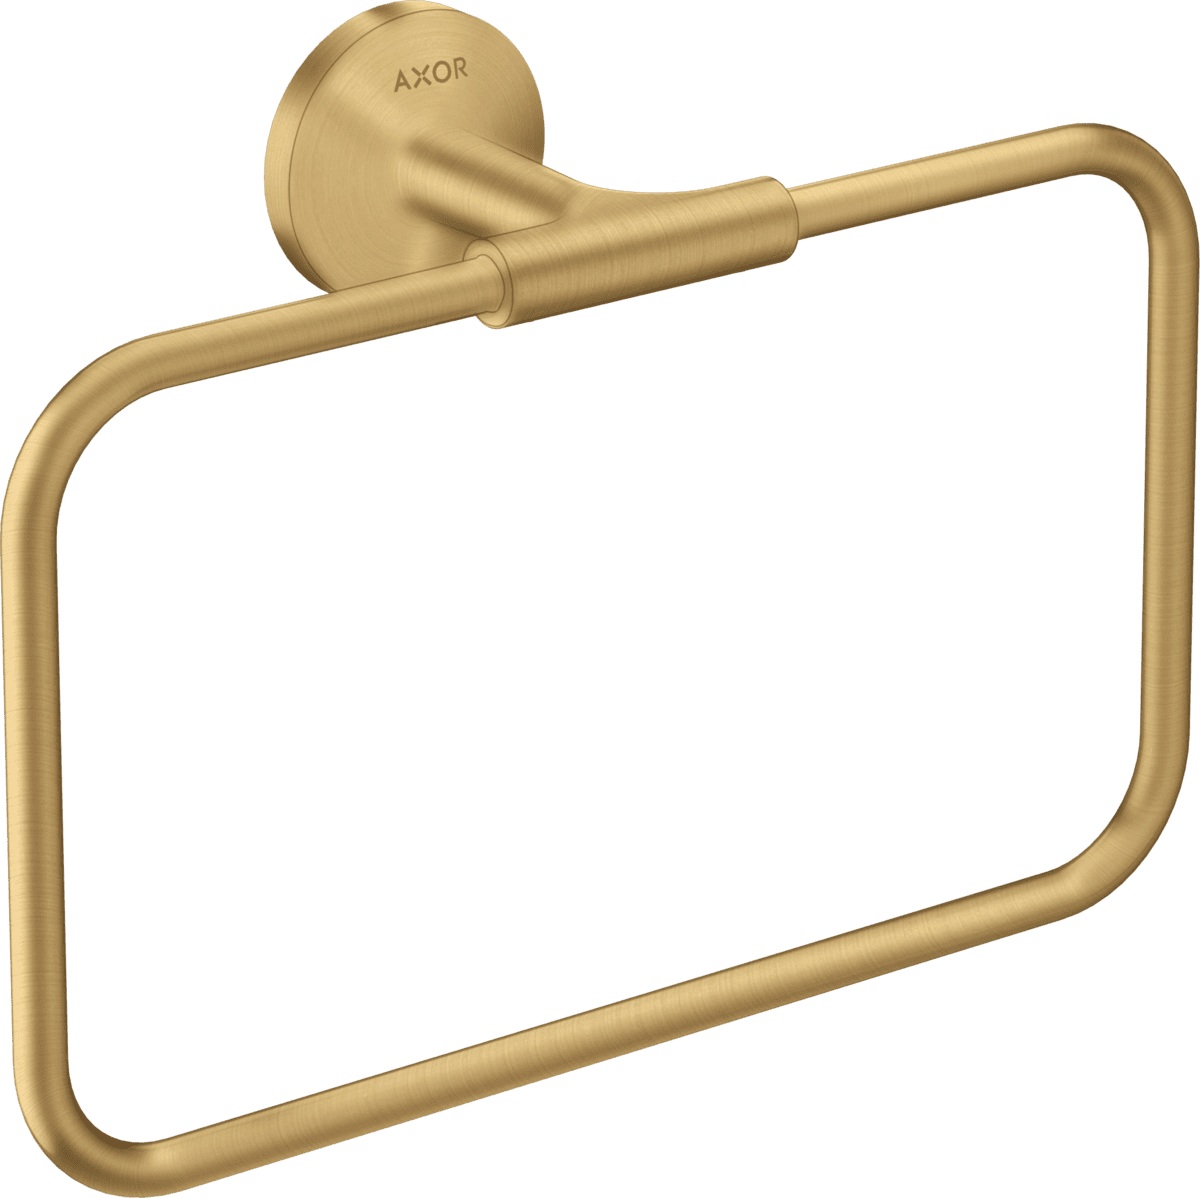 Picture of HANSGROHE AXOR Universal Circular Towel ring #42823250 - Brushed Gold Optic